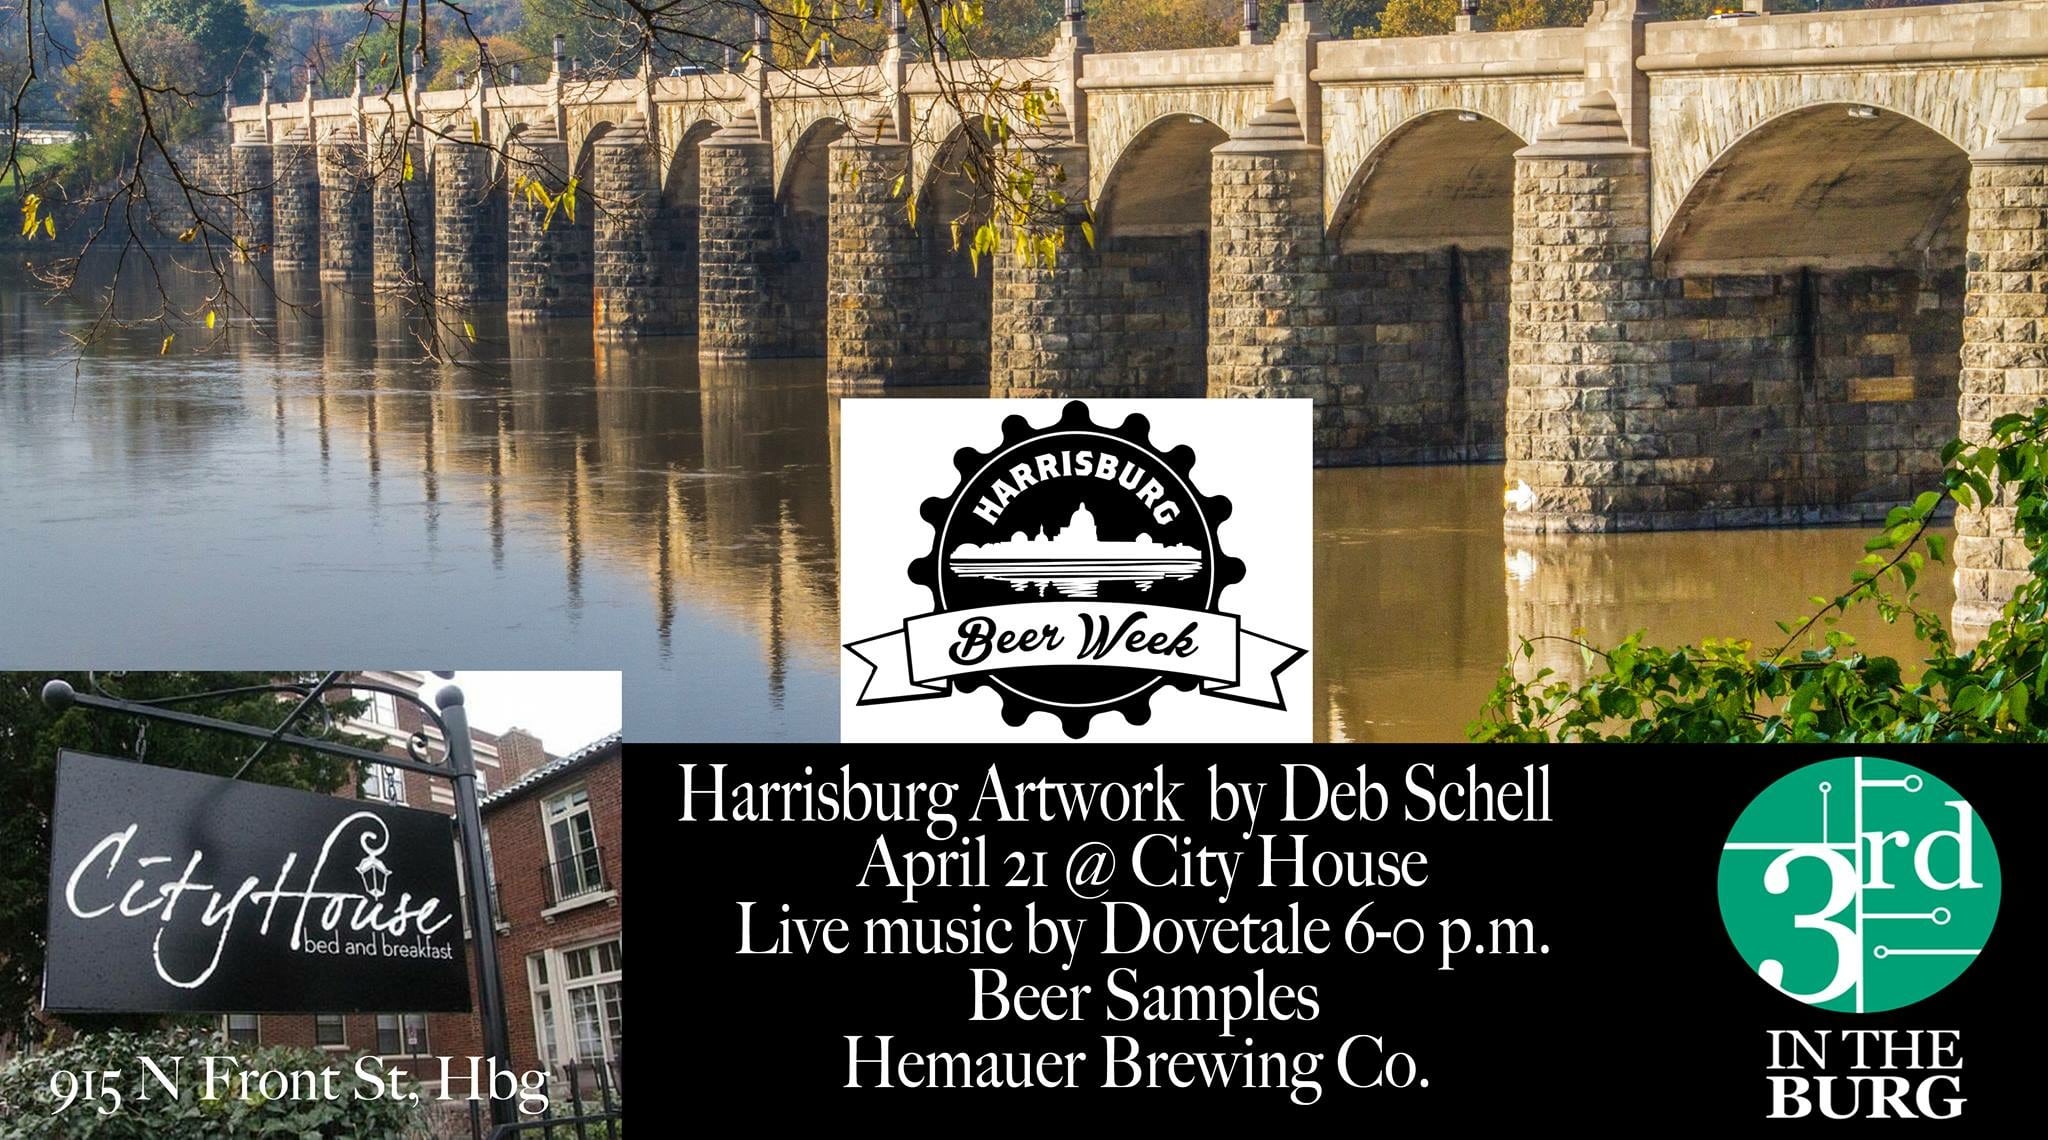 3rd in the Burg April 2017 Event Hemauer Brewing Co Dillsburg PA